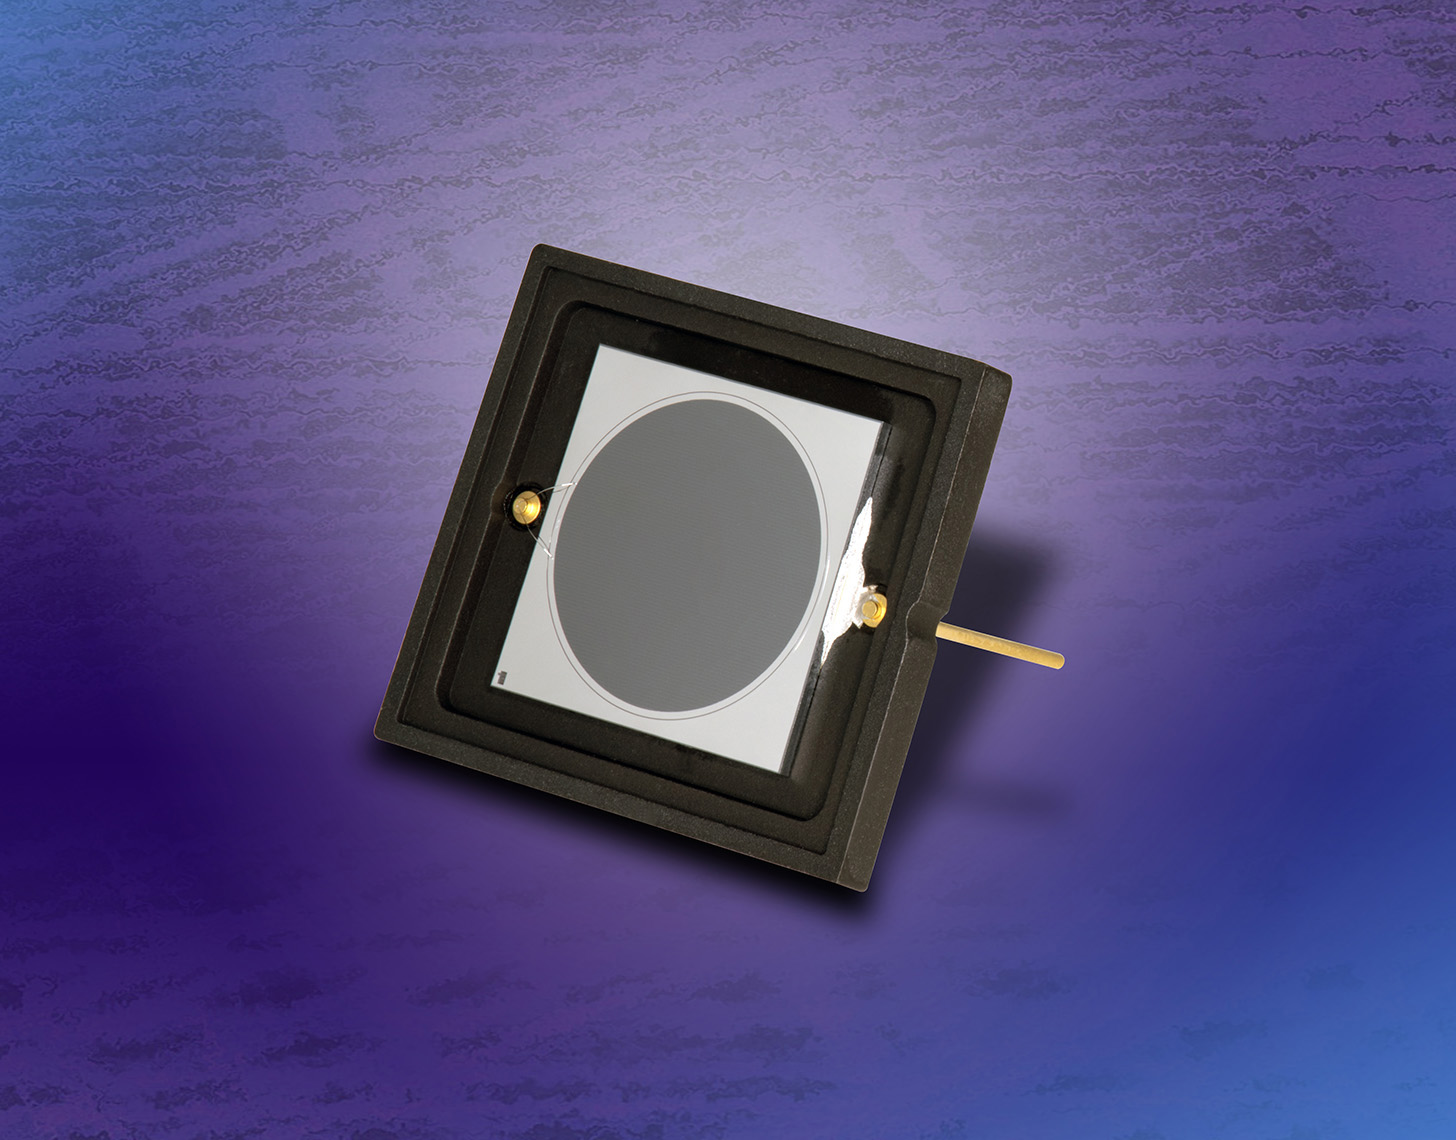 Opto Diodes latest high-speed photodetector the AXUV63HS1